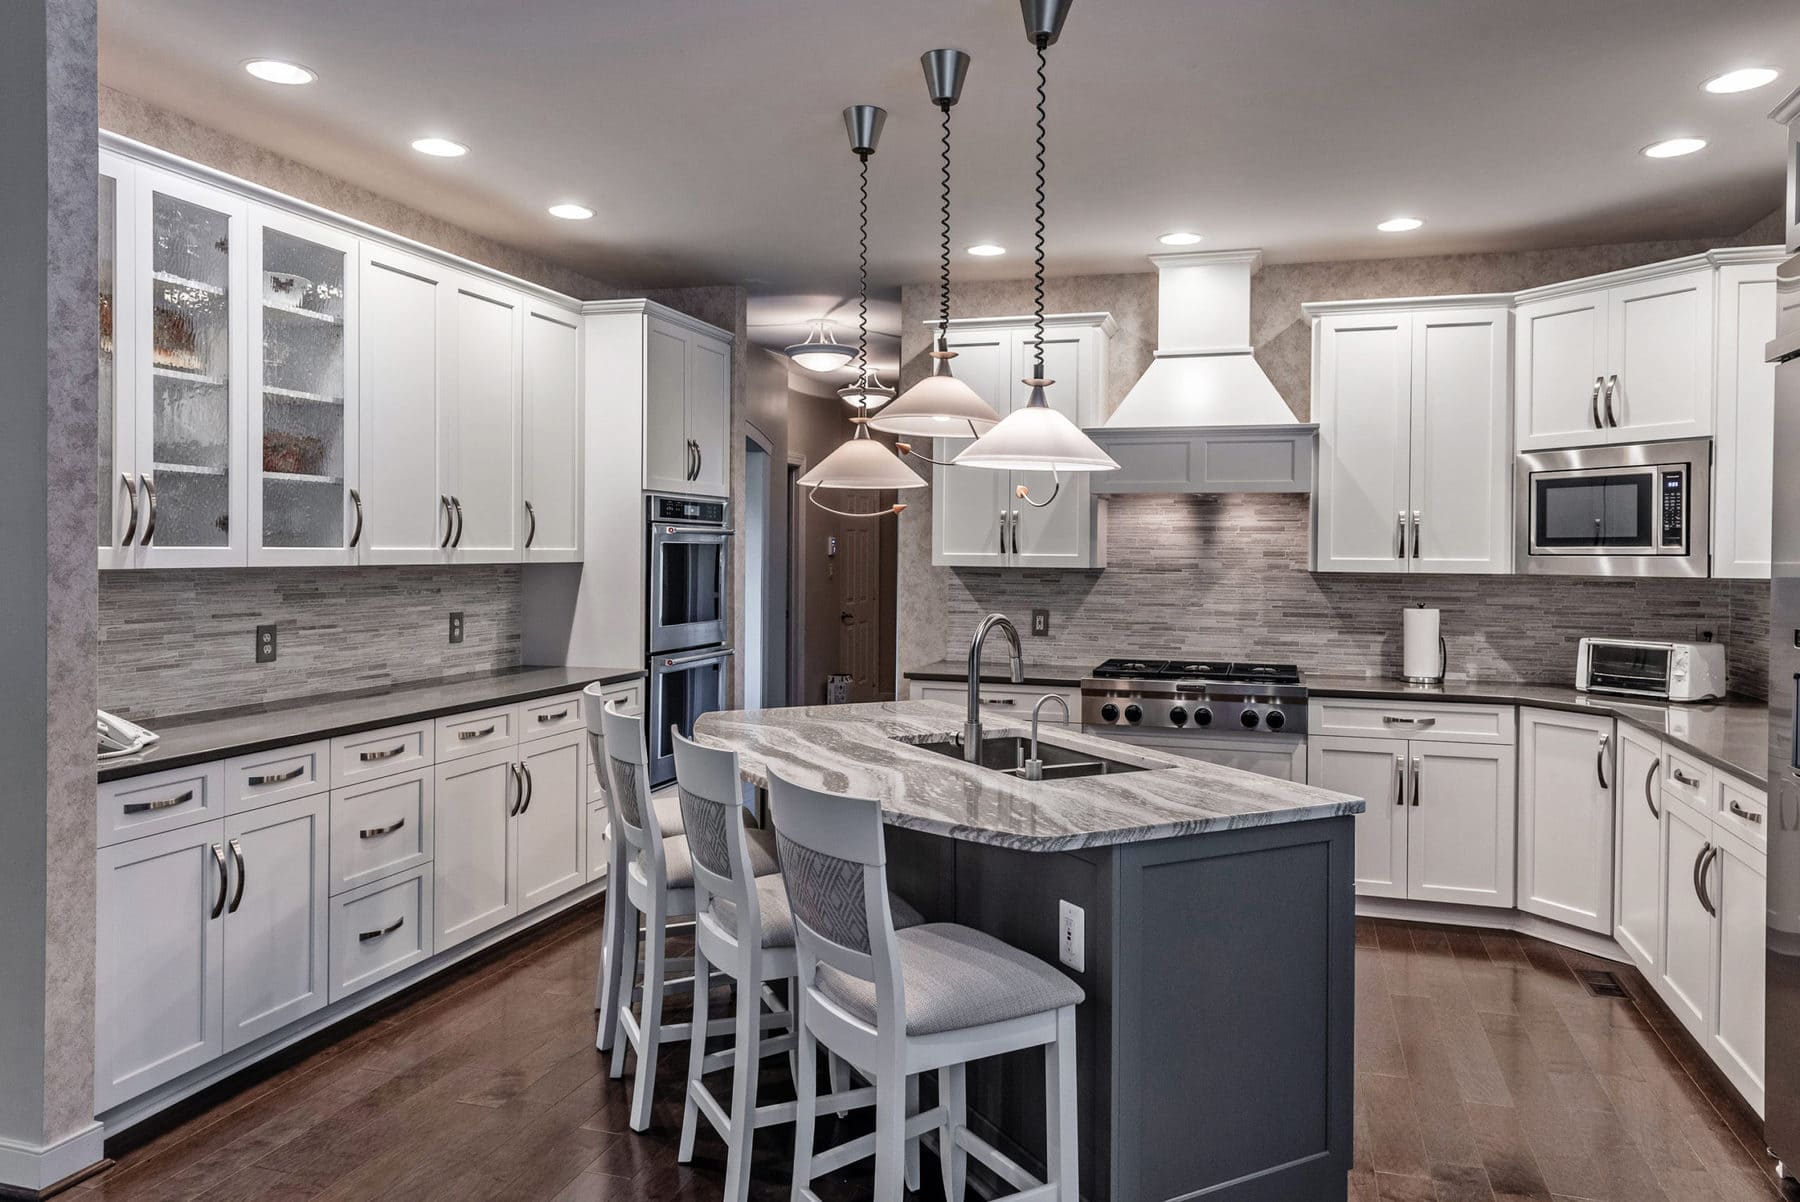 A gray and white kitchen with quartz countertops and stainless-steel appliances.